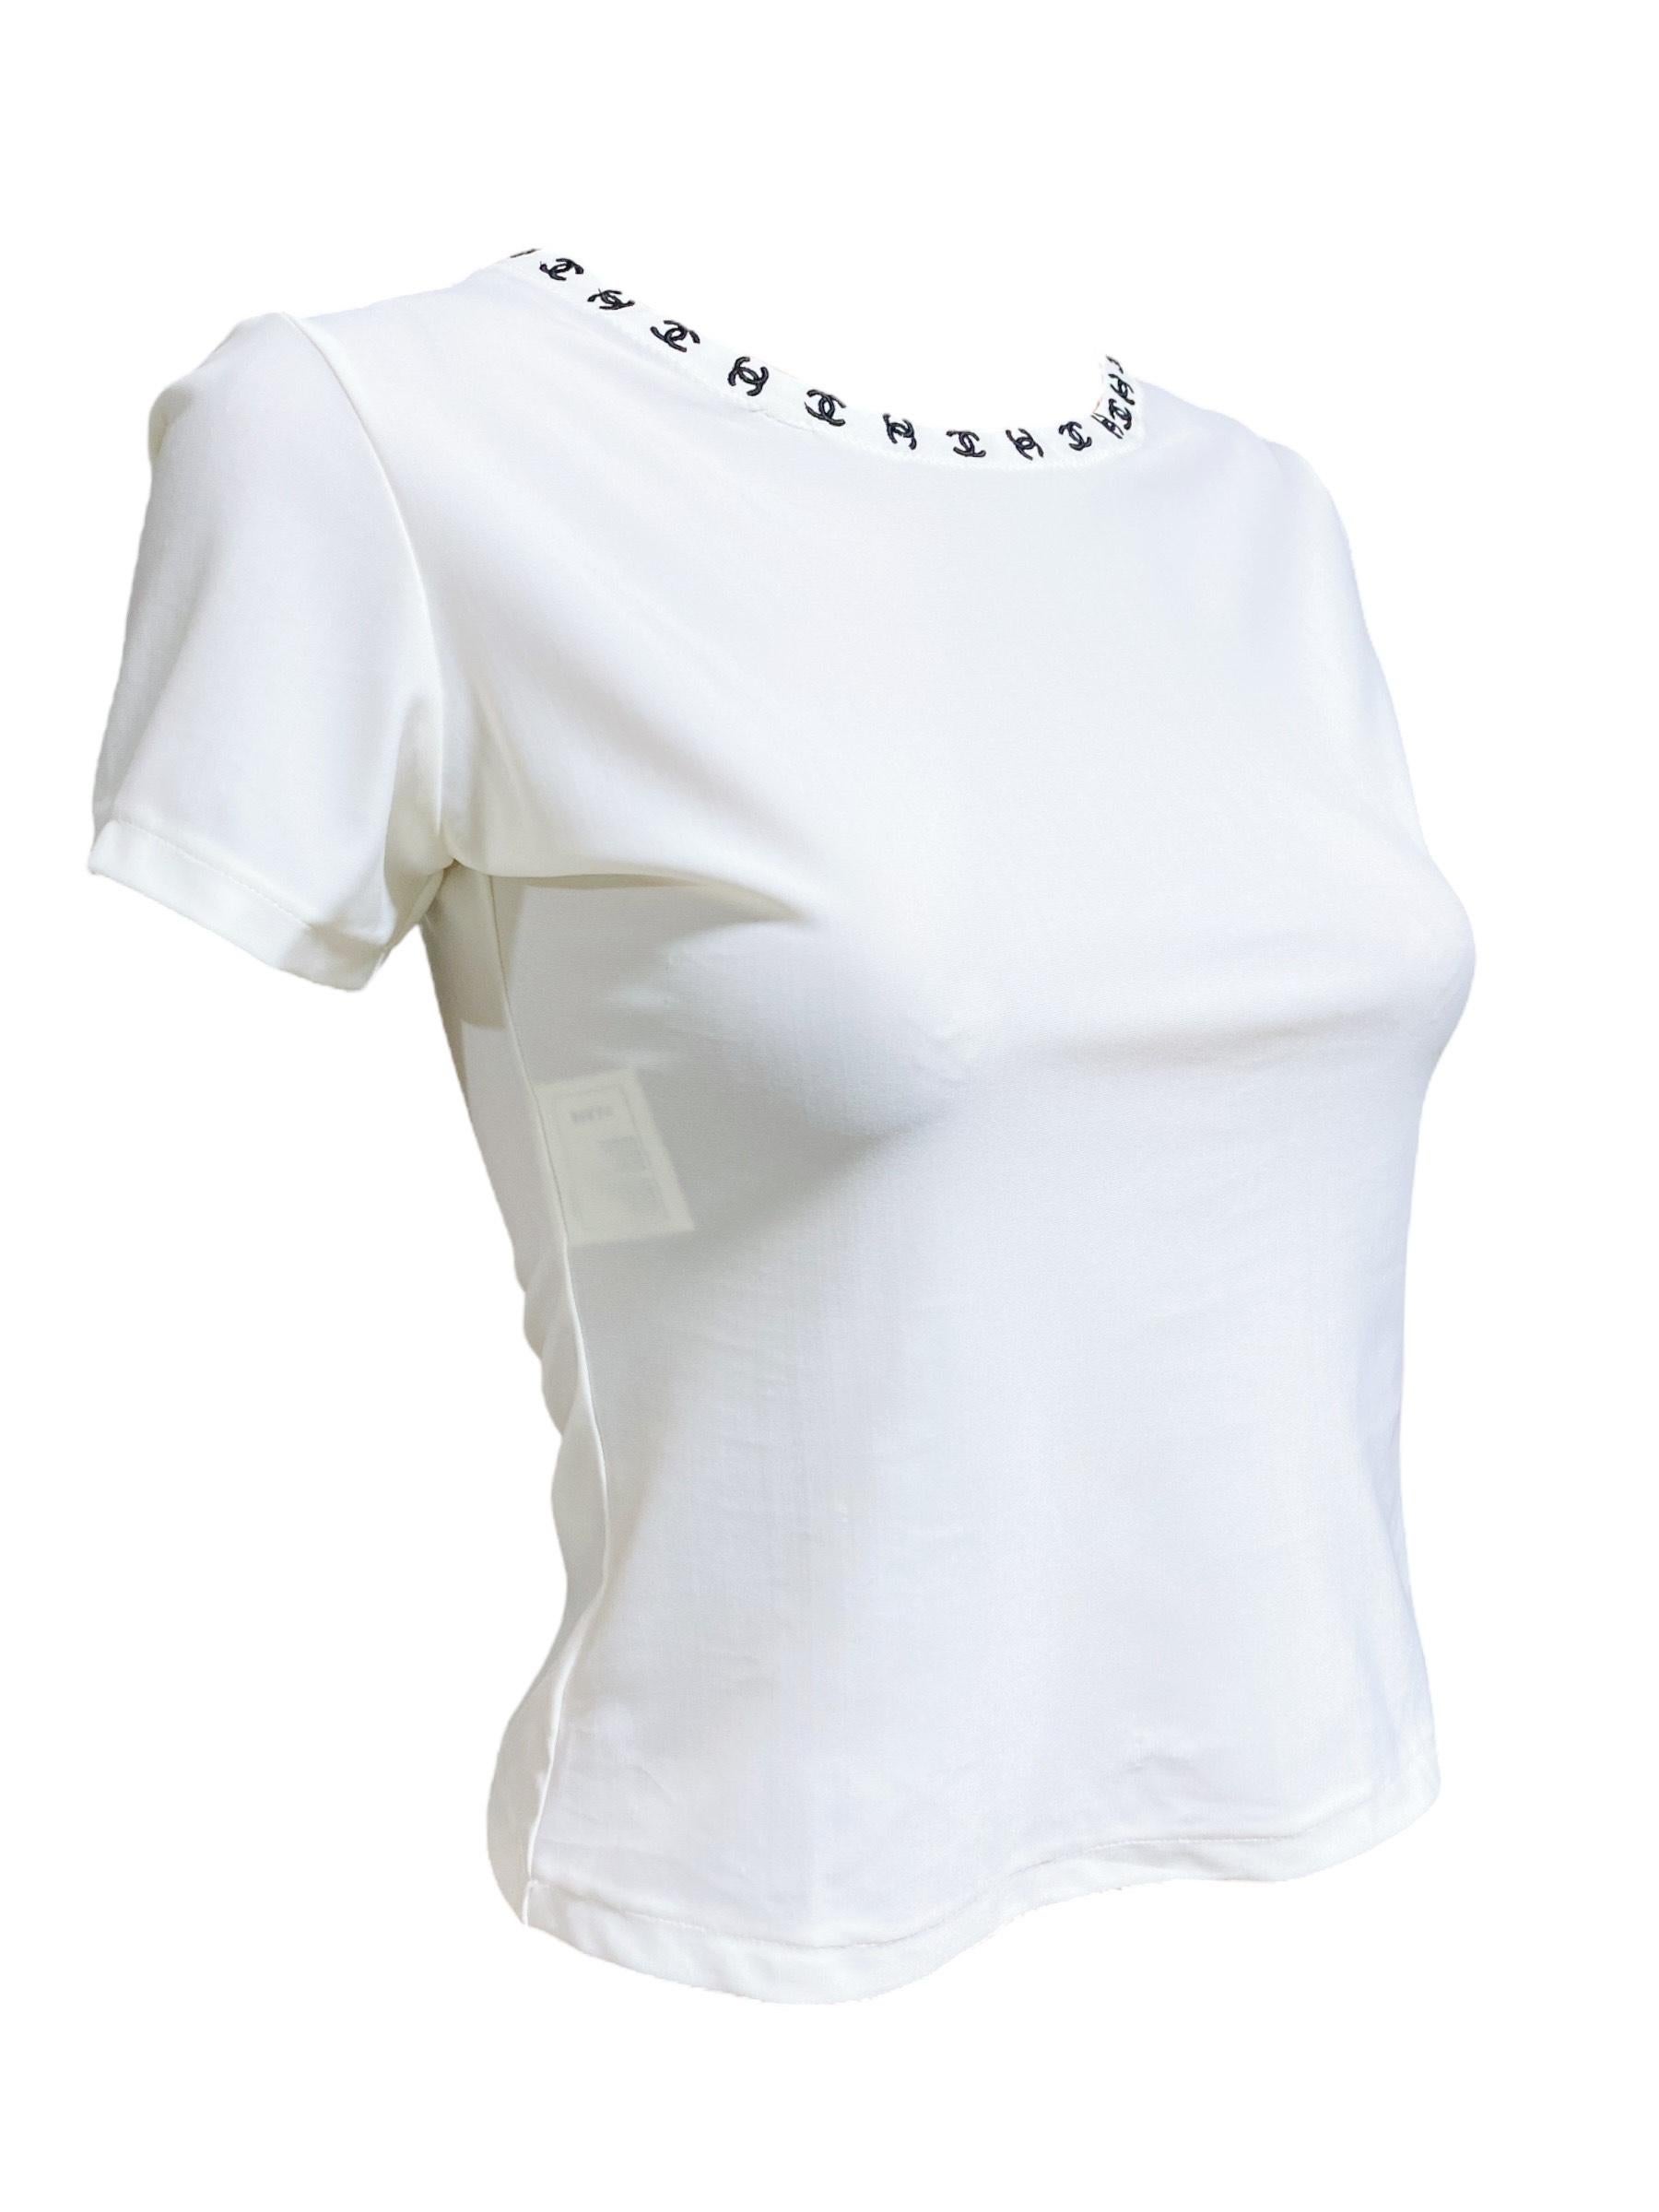 Iconic and extremely hard-to-find Chanel top. This white top is made of a polyester blend and features embroidered logos on the neck part.

Quote by Coco Chanel: “𝑺𝒊𝒎𝒑𝒍𝒊𝒄𝒊𝒕𝒚 𝒊𝒔 𝒕𝒉𝒆 𝒌𝒆𝒚𝒏𝒐𝒕𝒆 𝒐𝒇 𝒂𝒍𝒍 𝒕𝒓𝒖𝒆